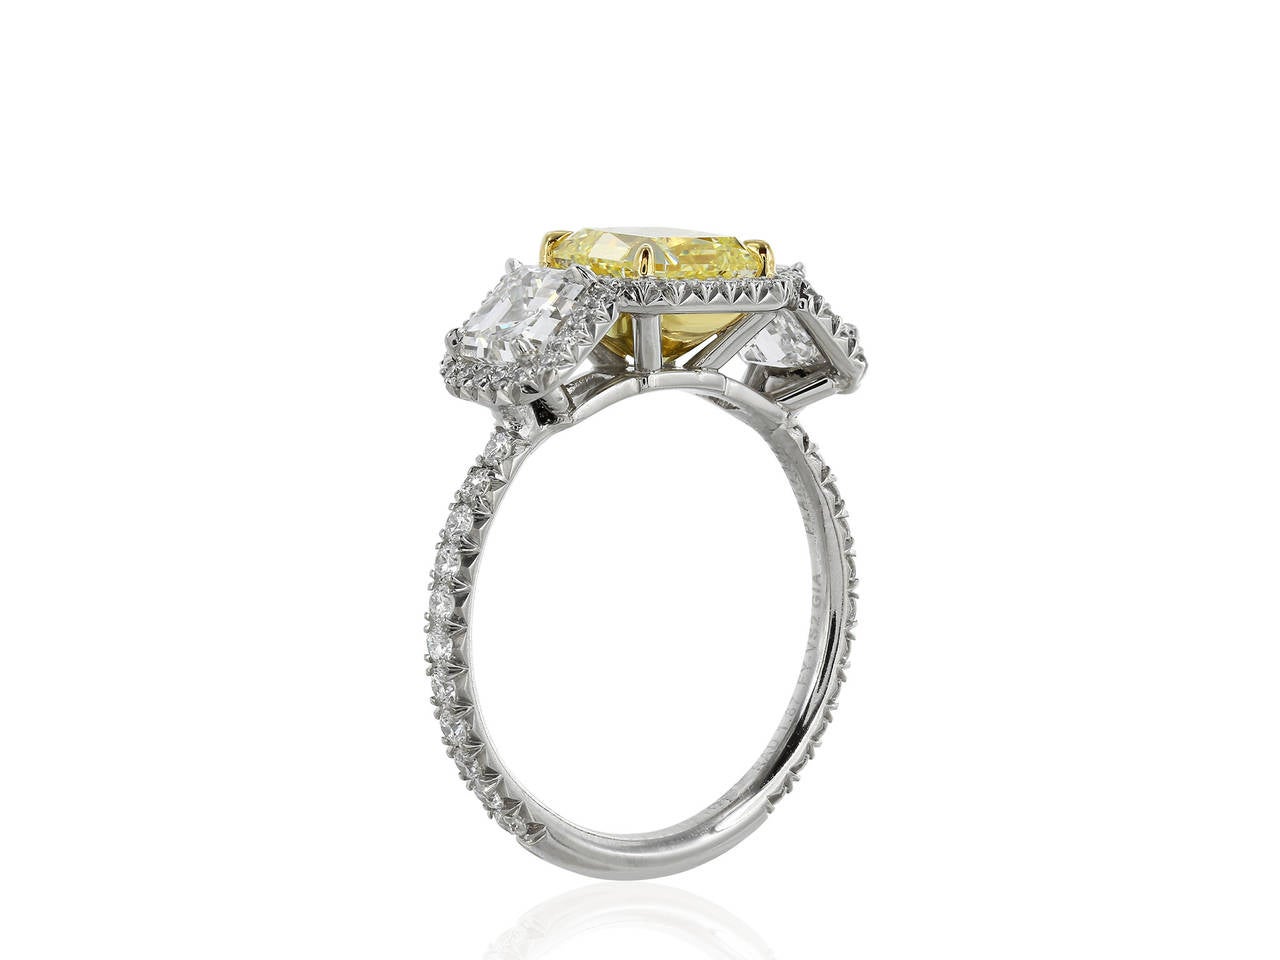 Custom made, platinum and 18 karat yellow gold three stone engagement ring consisting of one radiant cut canary diamond weighing 1.87 carats, measuring 6.75 x 6.69 x 4.48 mm, having a color of Natural Fancy Yellow/VS2 with GIA report number